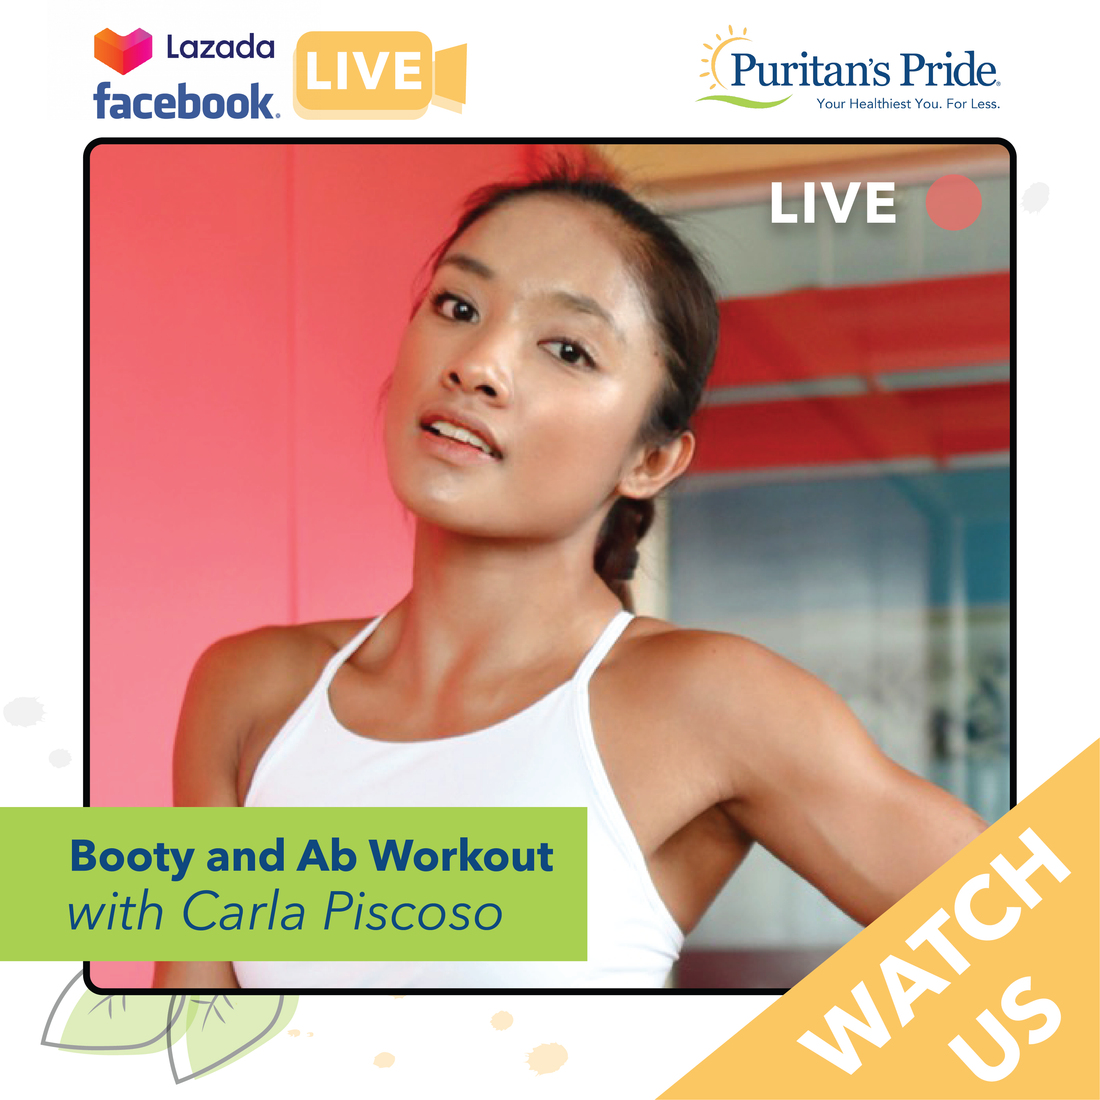 Workout Tuesday: Booty and Ab Workout with Carla Piscoso